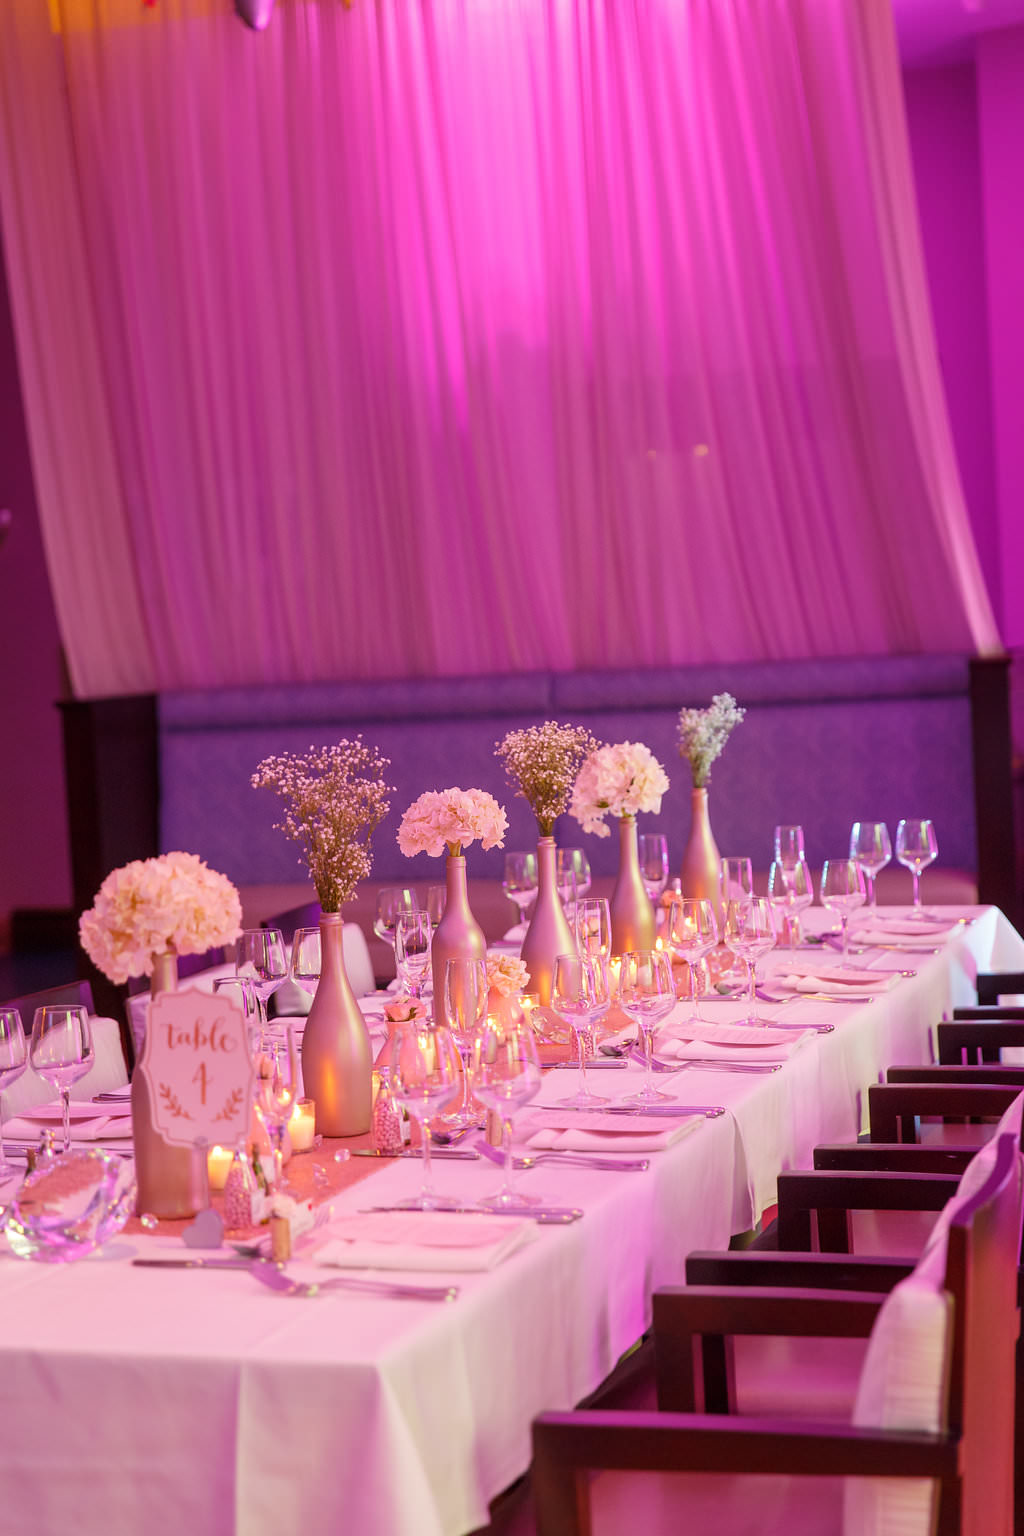 Colorful Indoor Hotel Wedding Reception with Long Feasting Tables, Metallic Painted Bottle Centerpieces on Runner with votive Candles | Venue The Tampa Renaissance